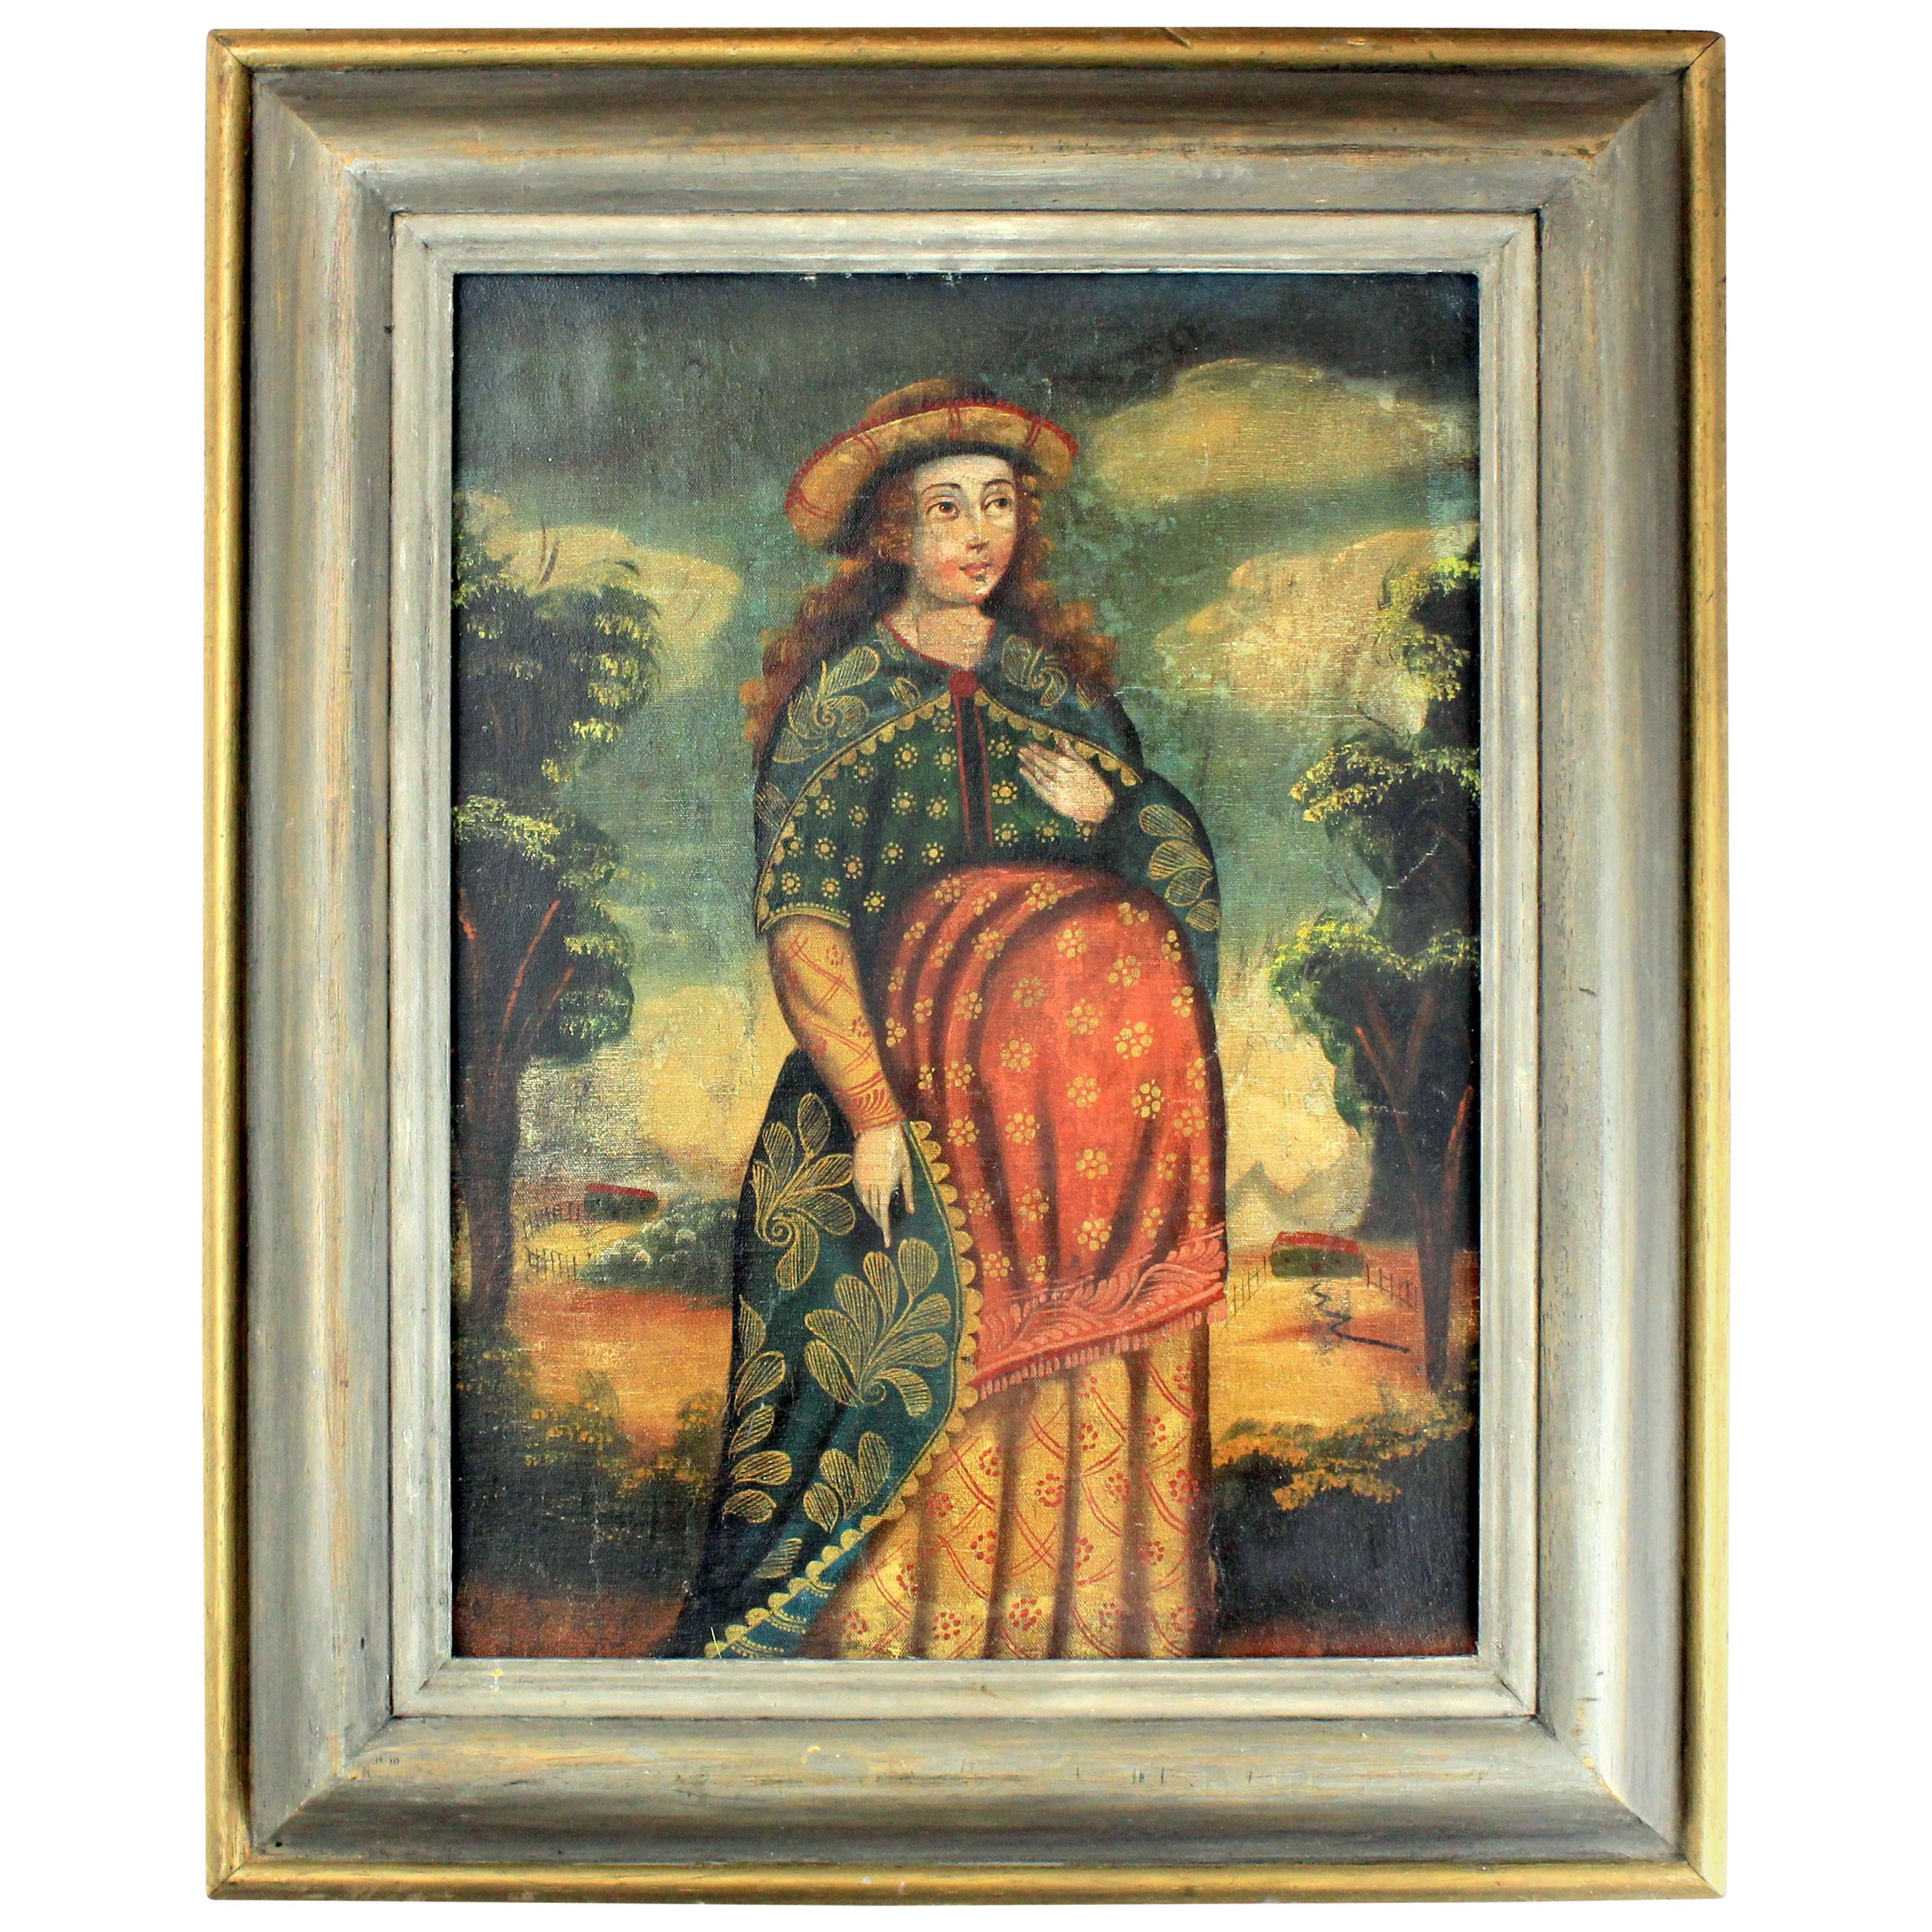 Antique Cuzco School oil on hardboard painting, Expecting Madonna, 18th century